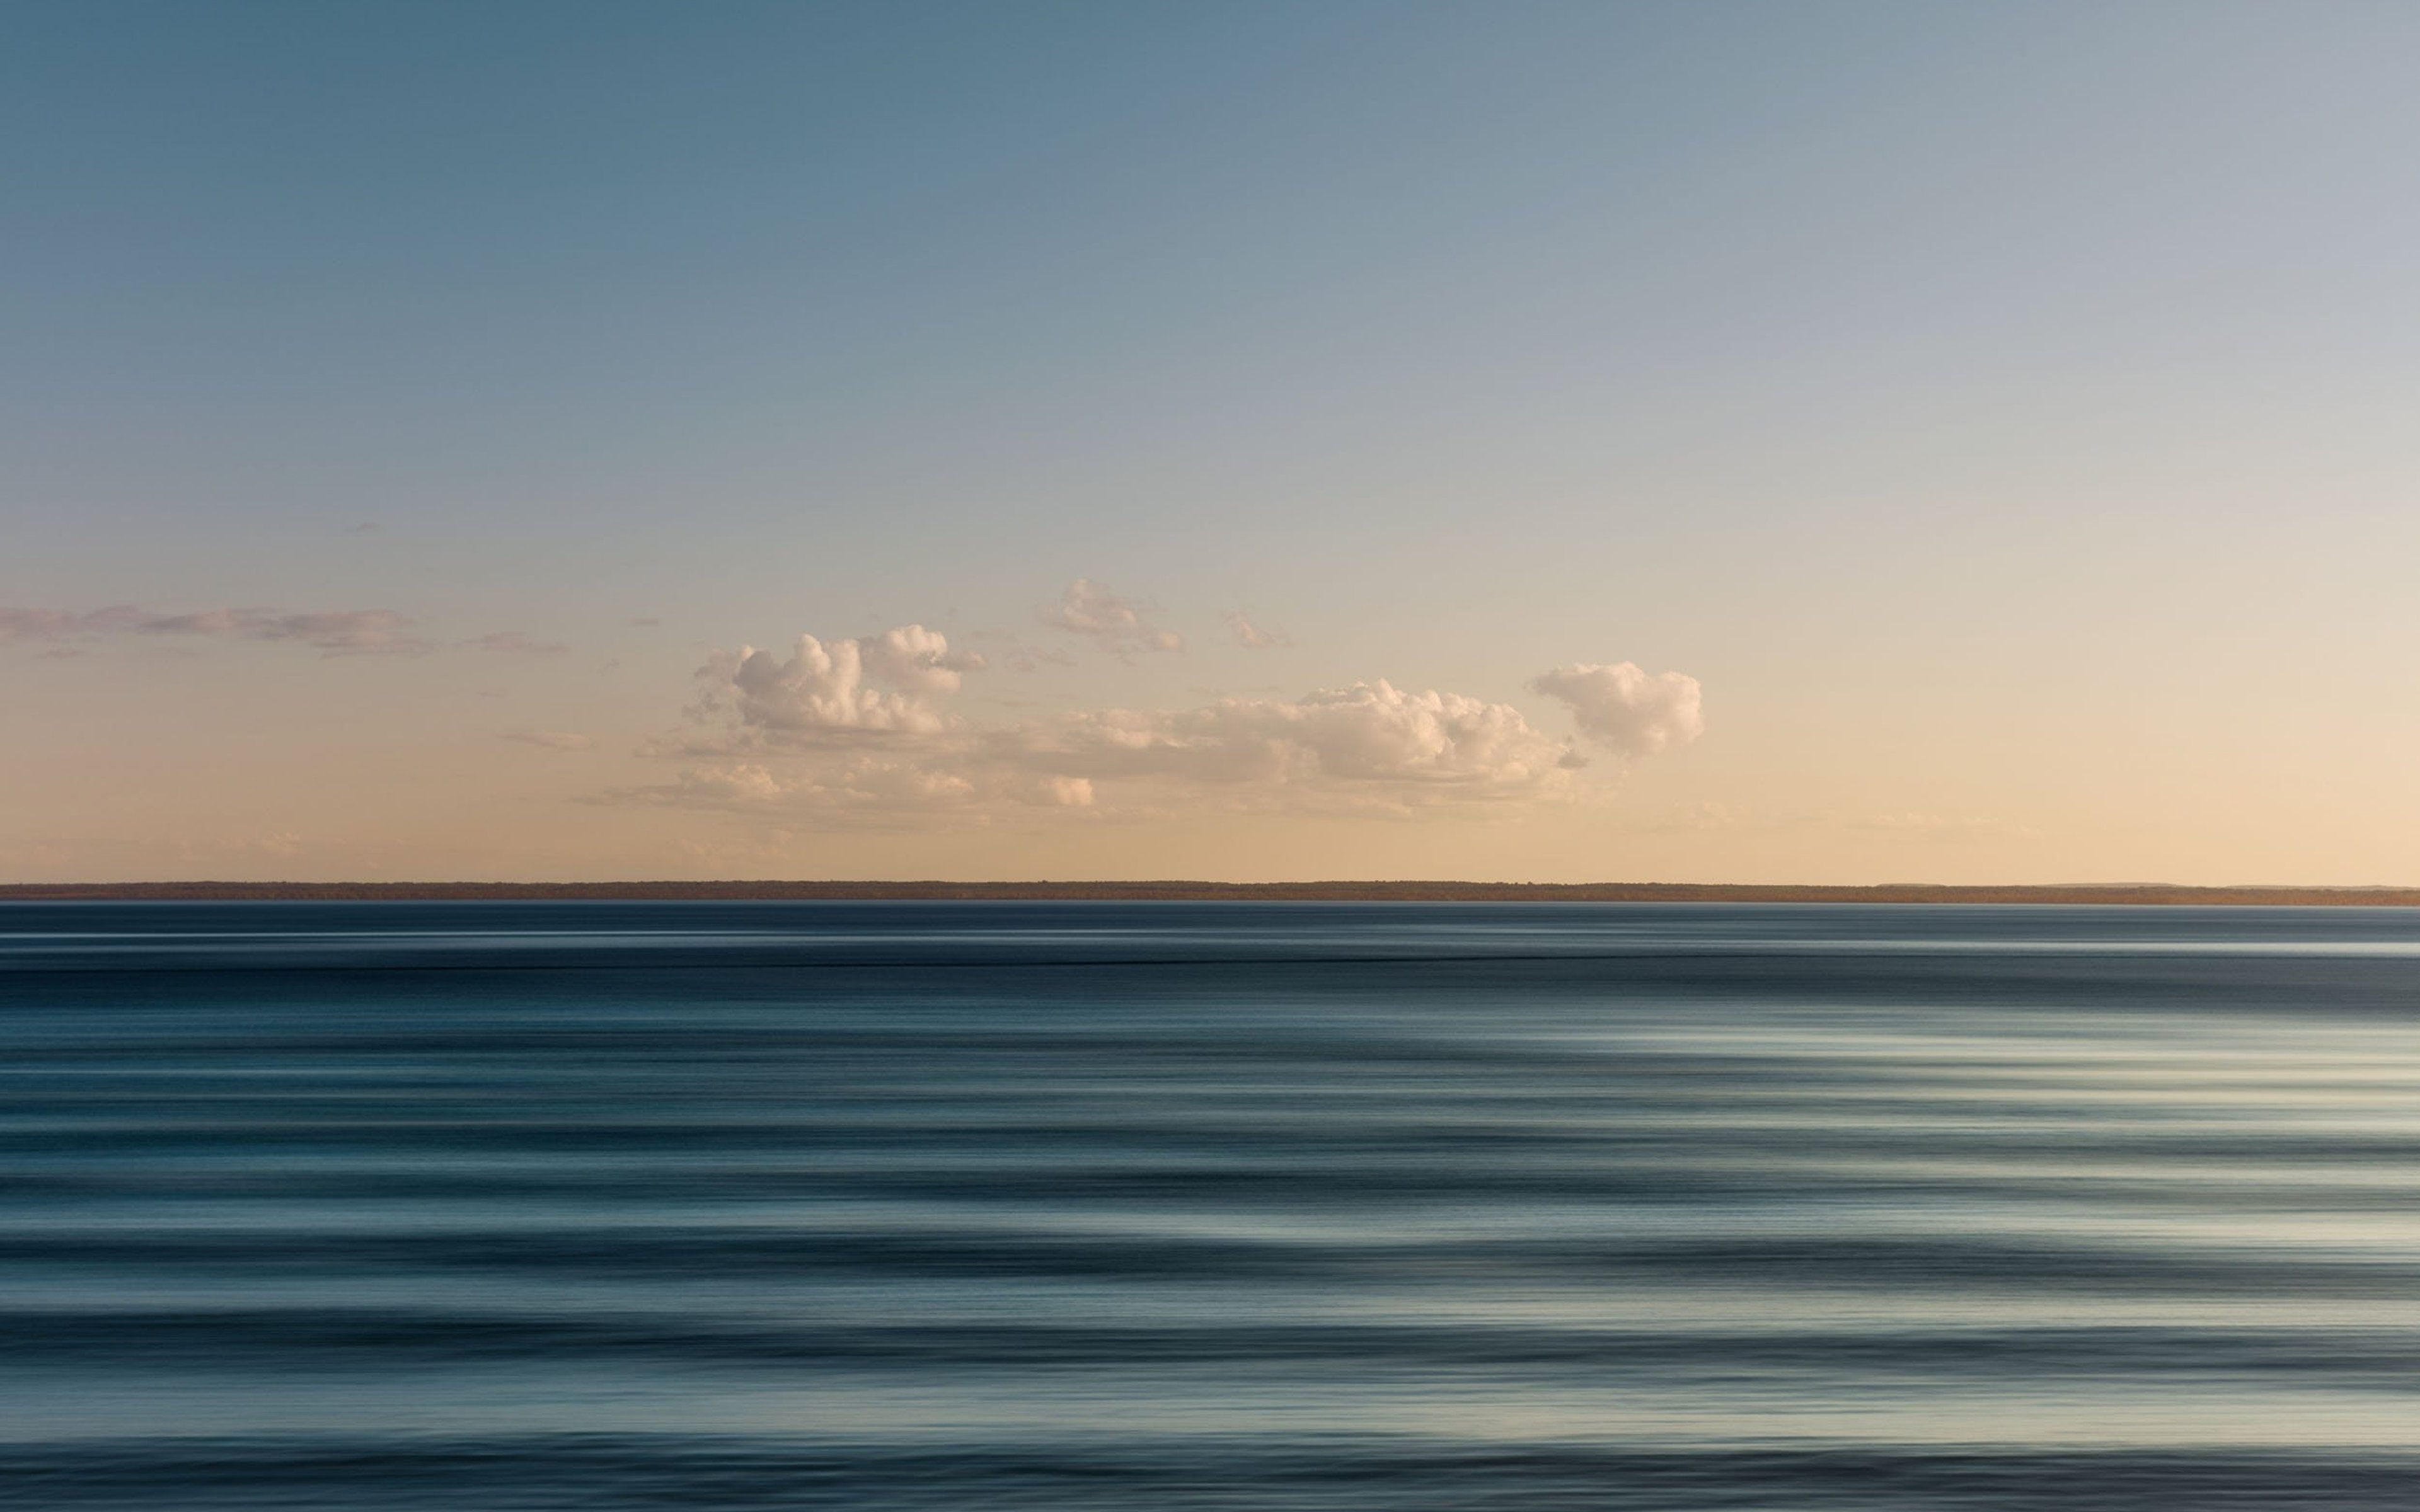 Landscape of a still rippled ocean at dusk in mild weather with clouds across the sky.